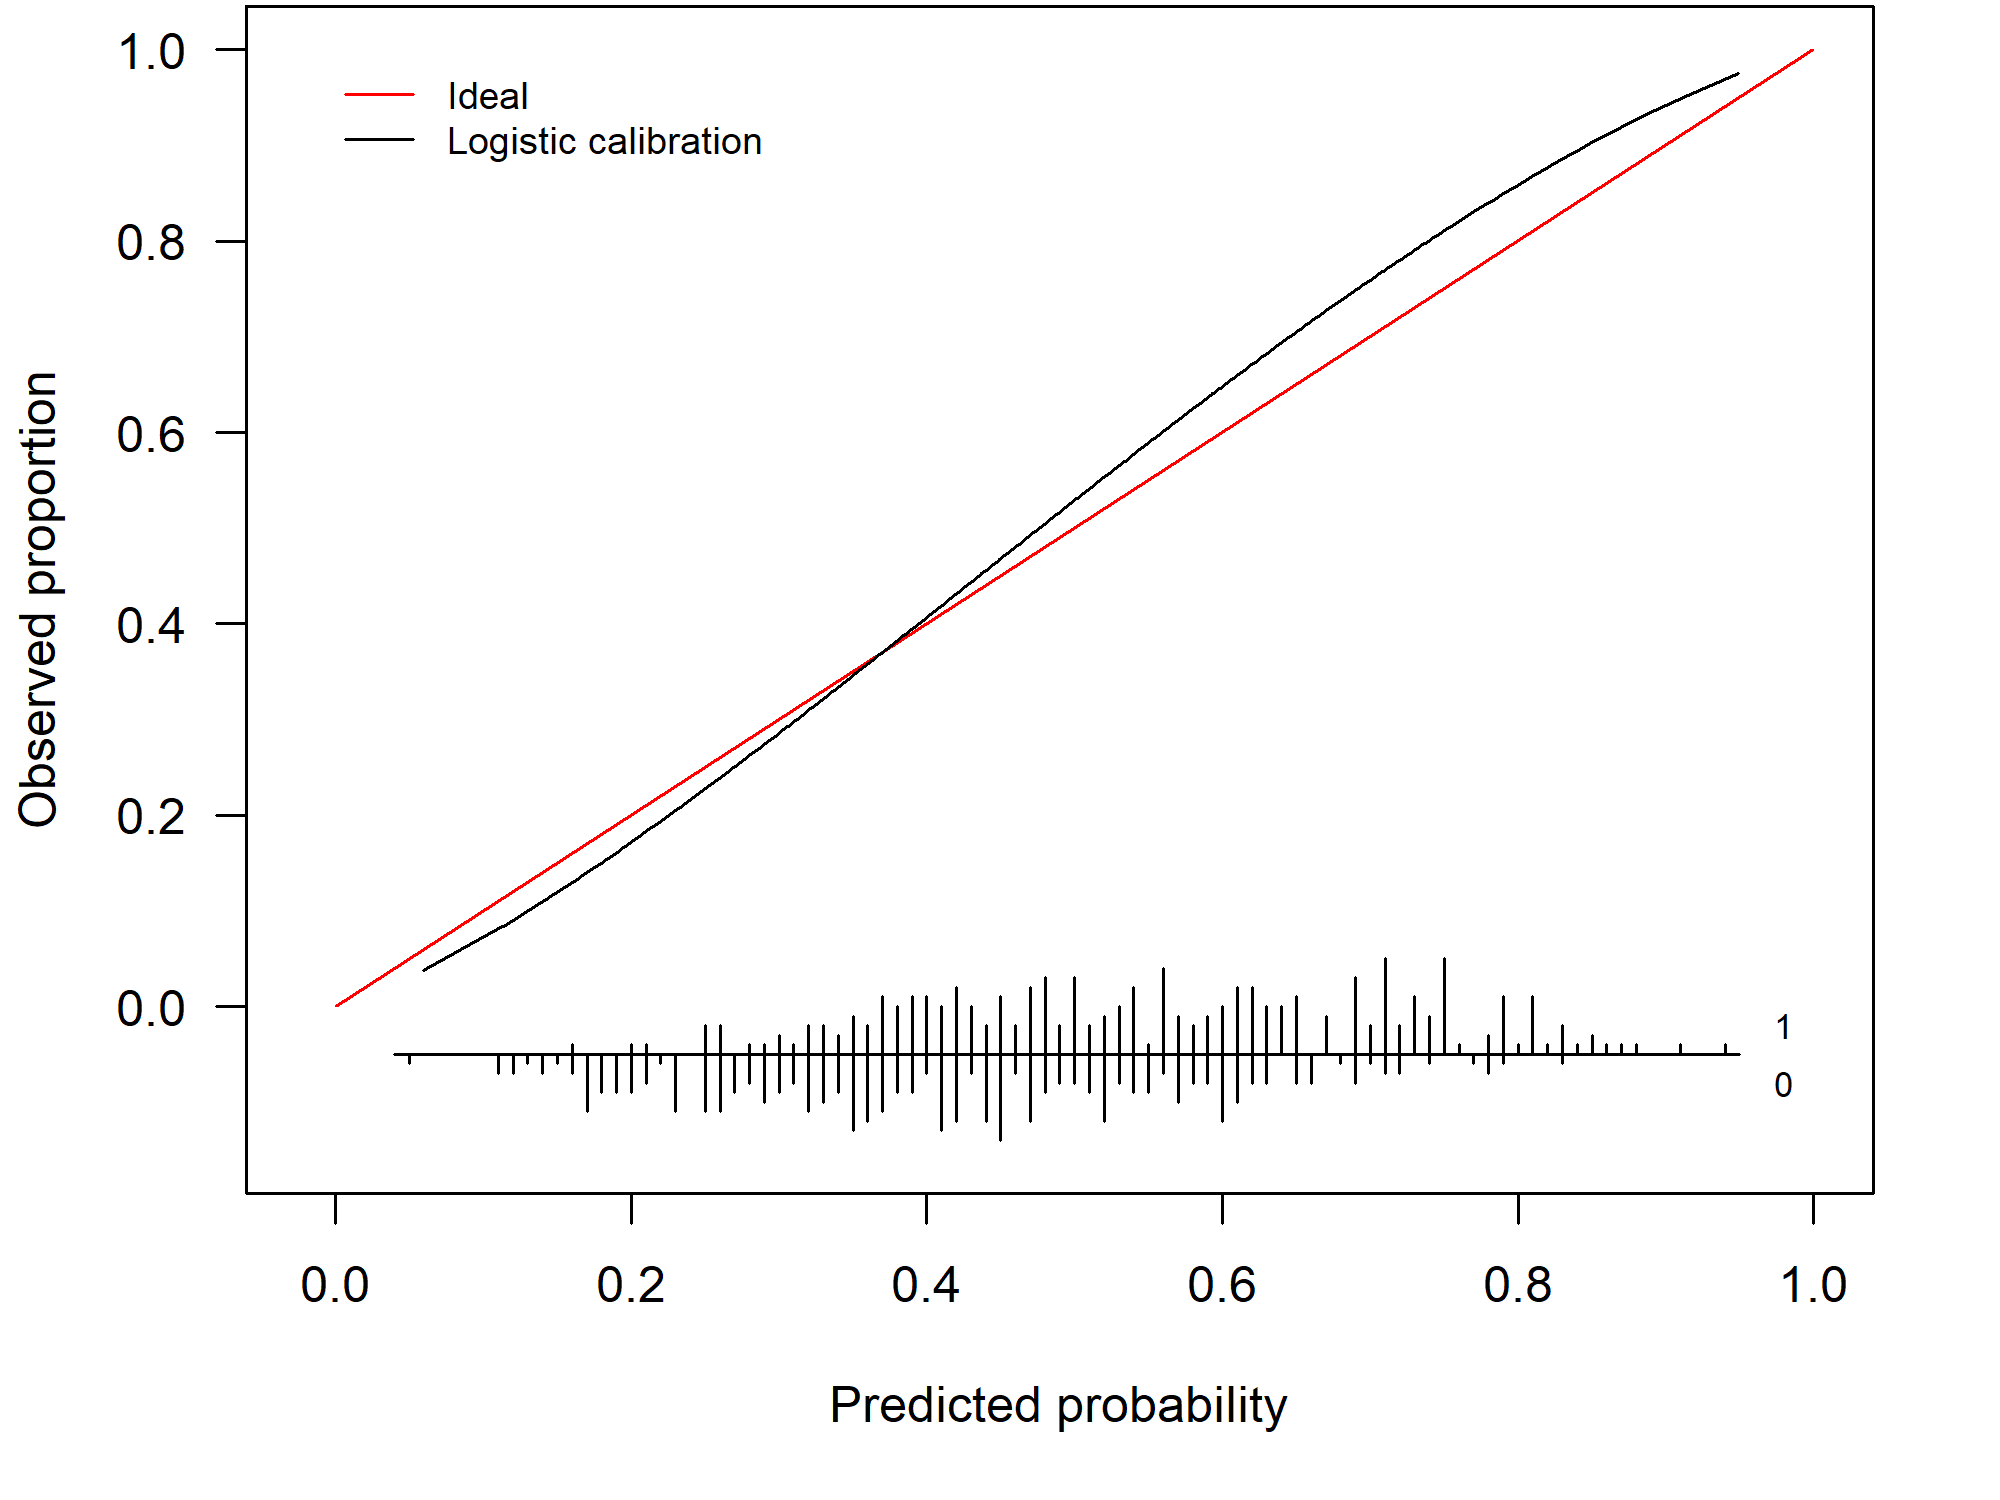 Example of a miscalibrated model due to underfitting